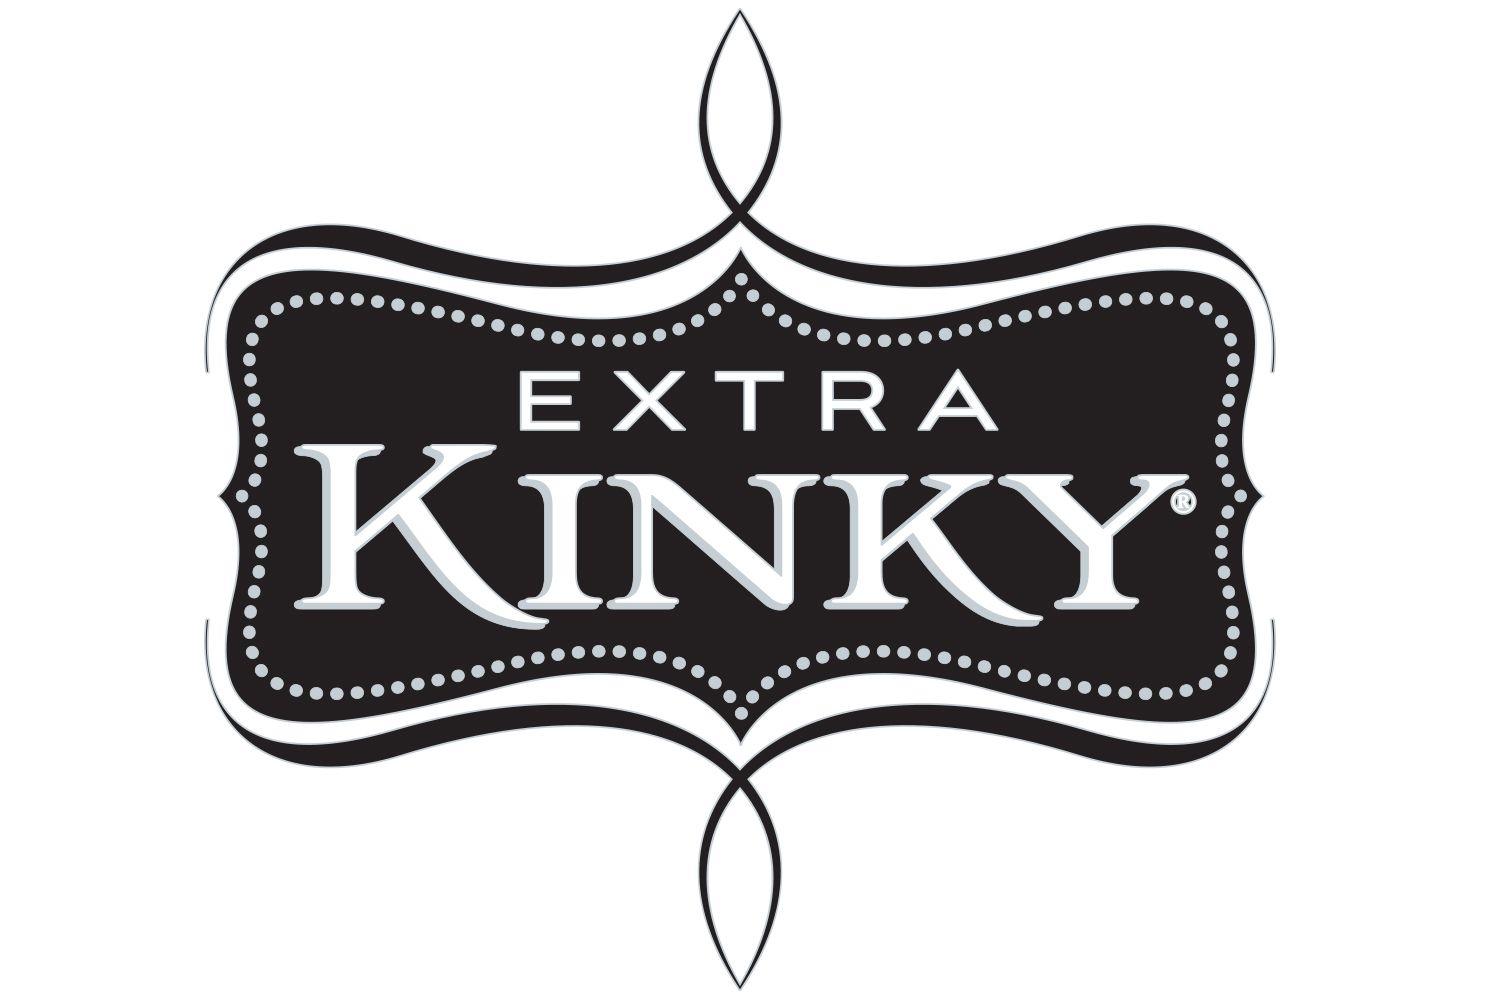 Kinky Logo - EXTRA KINKY Cocktails in Cans Taking Shelves